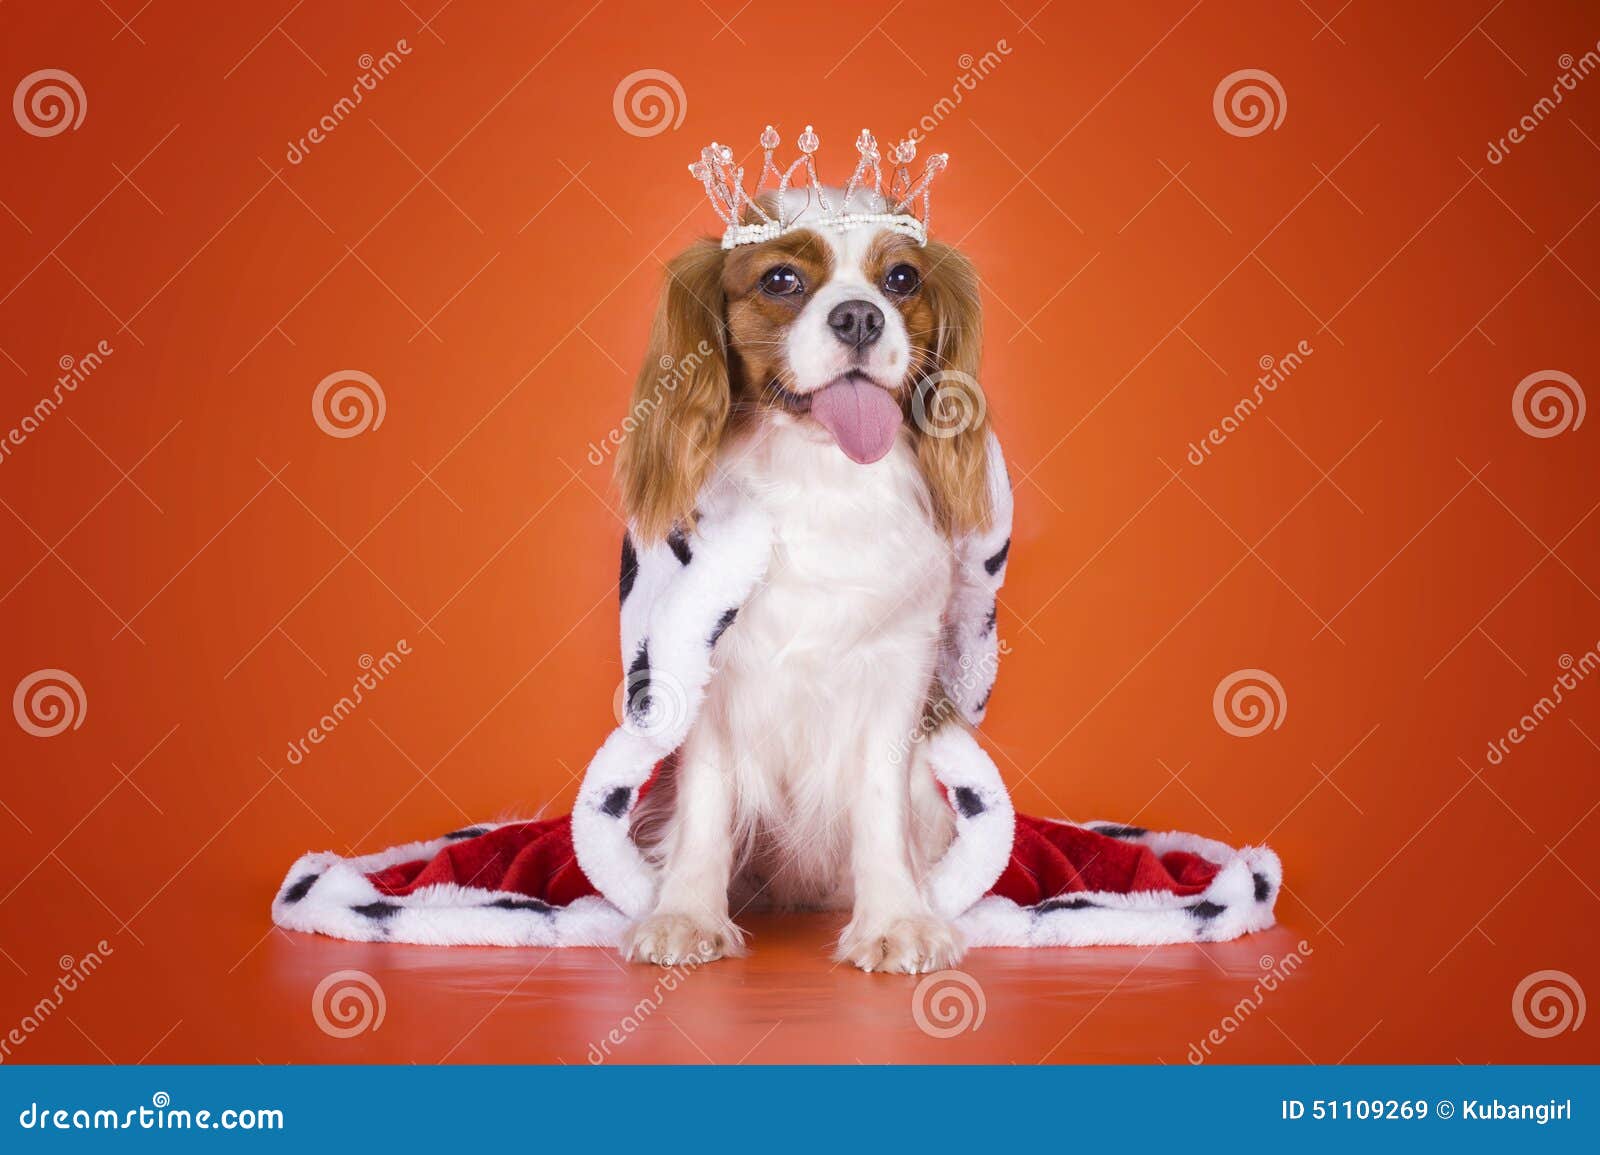 puppy cavalier king charles spaniel in a suit of the queen on or